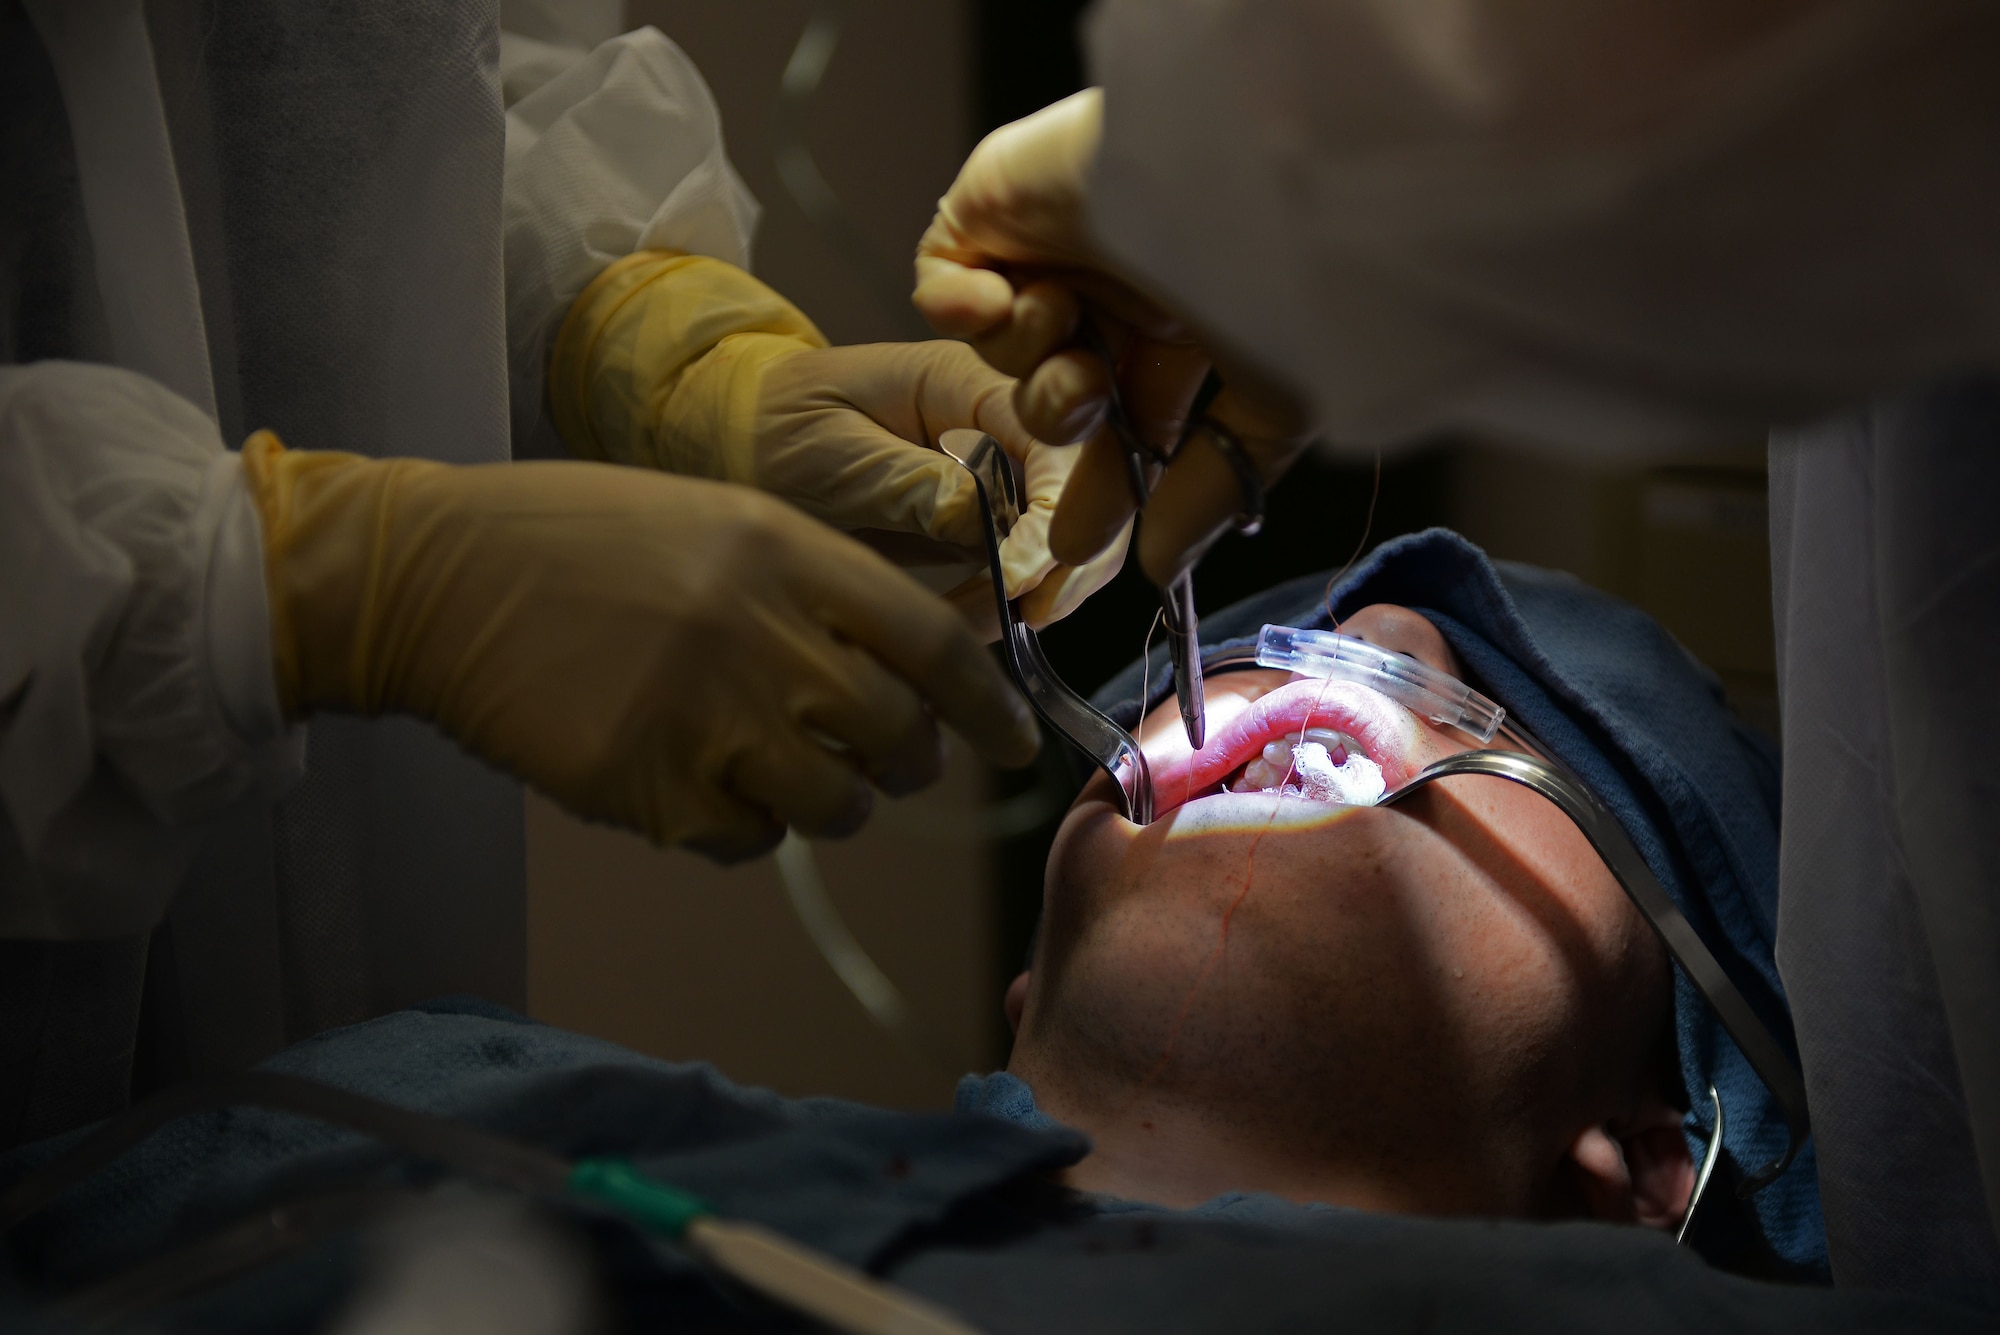 U.S. Air Force Maj. Jamie Smith, 20th Dental Squadron dental flight commander, and Airman 1st Class Apryl-Len Cabase, 20th DS dental technician, hold open a patient’s mouth to remove his wisdom teeth at Shaw Air Force Base, S.C., Jan. 17, 2018.